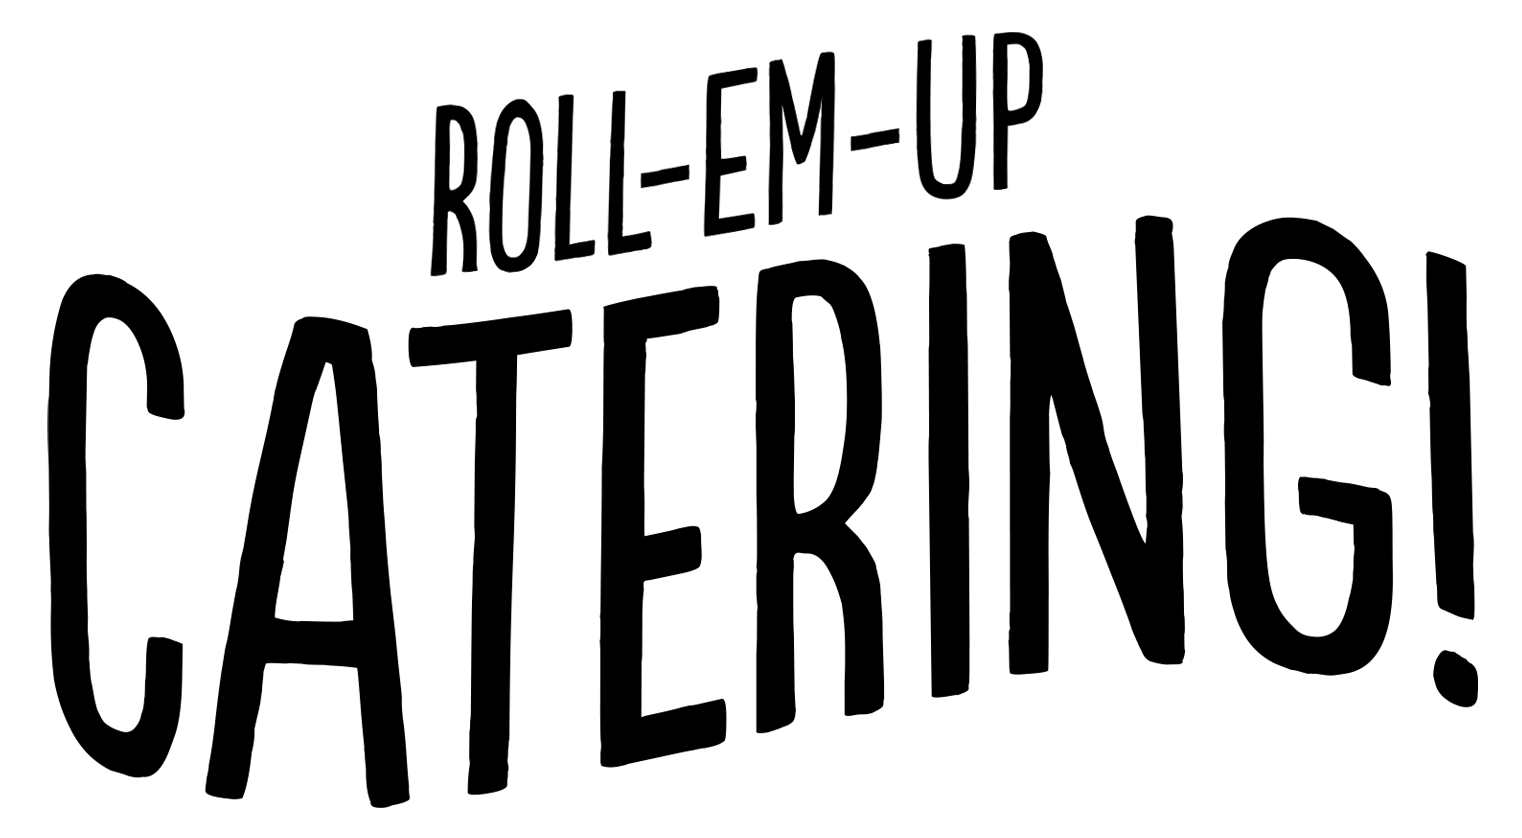 Roll-Em-Up Catering!